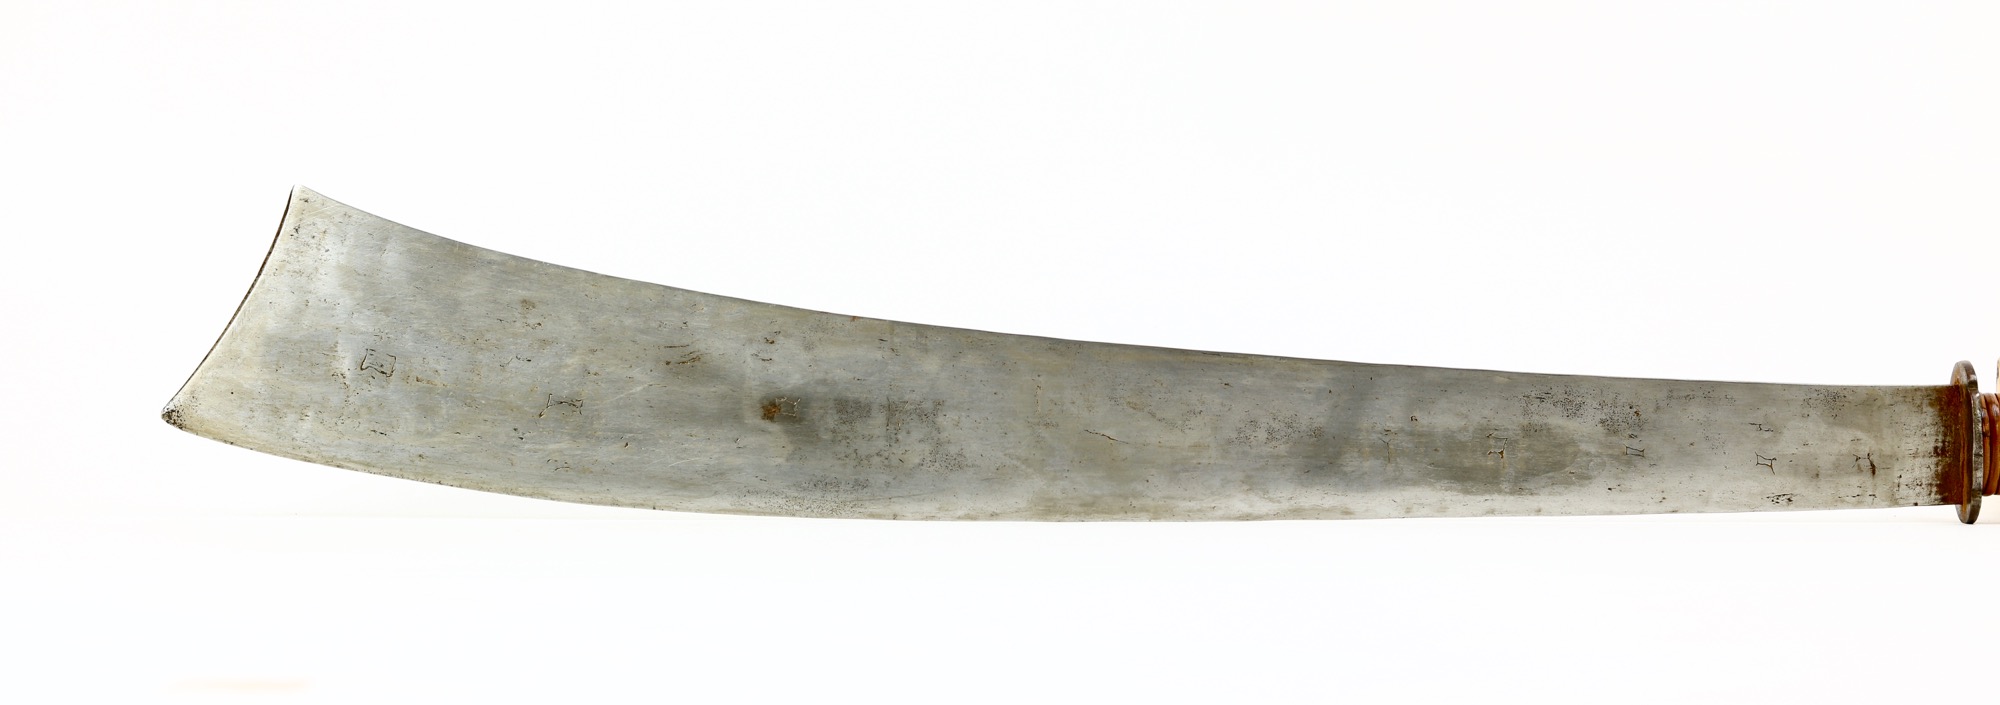 A rare Vietnamese wide-bladed fighting sword.